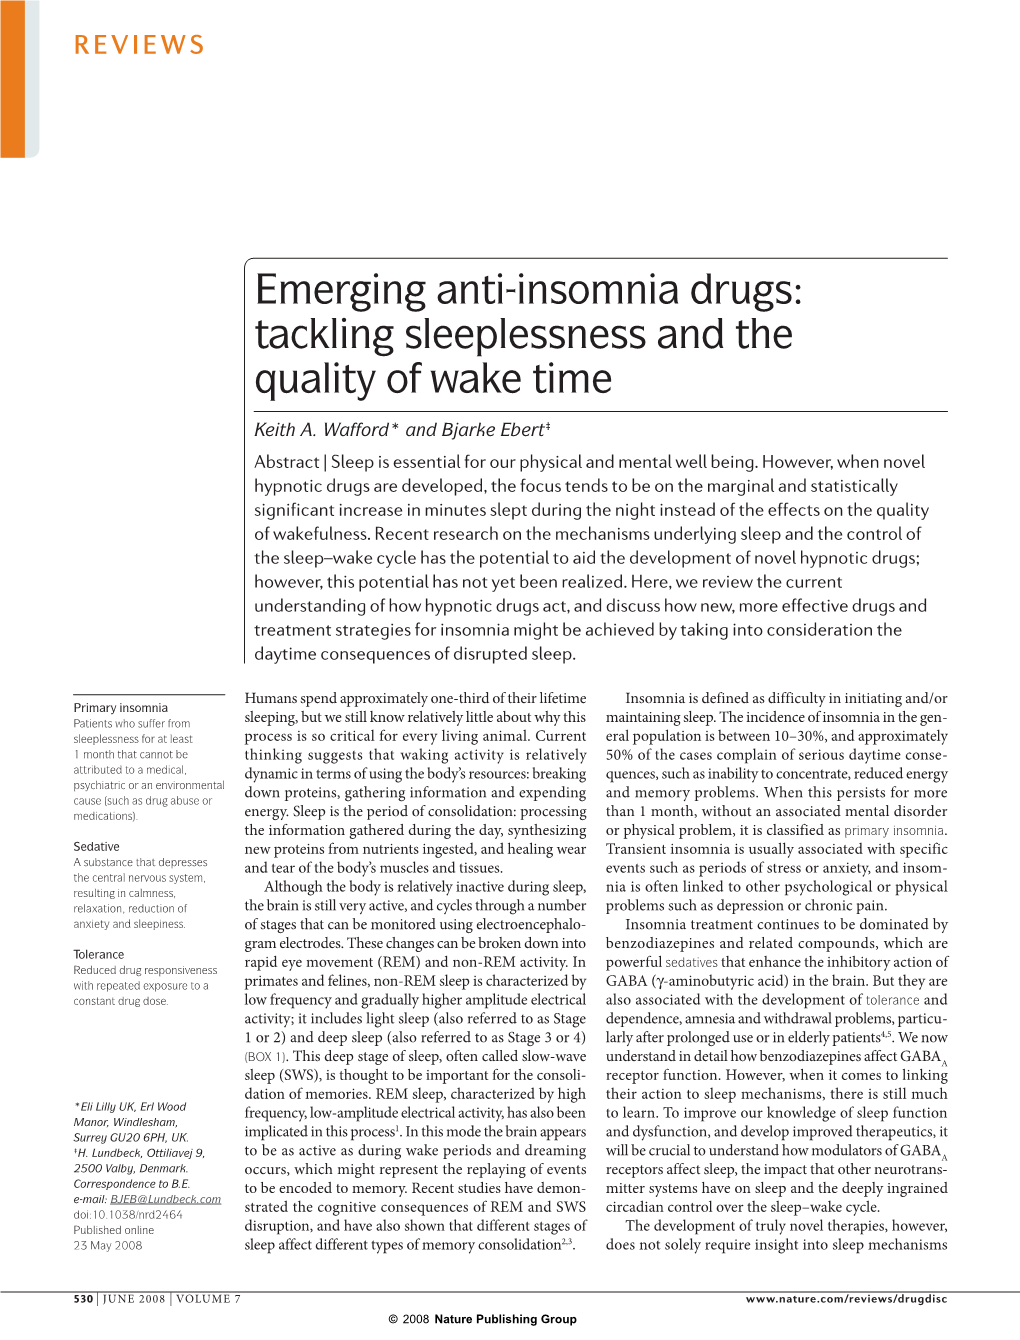 Emerging Anti-Insomnia Drugs: Tackling Sleeplessness and the Quality of Wake Time